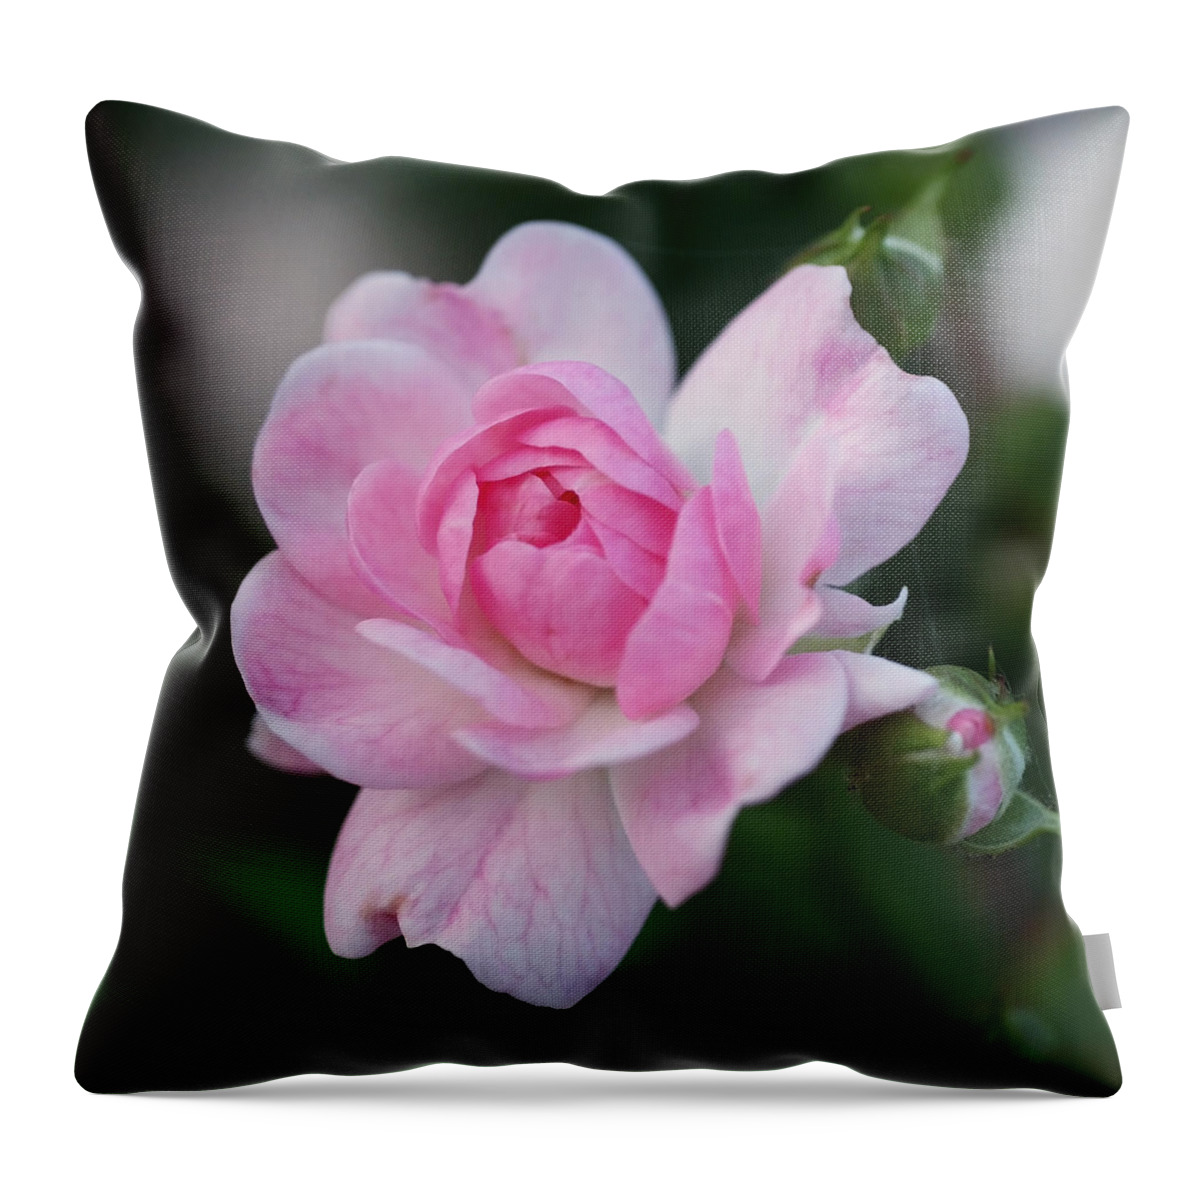 Rosebud Throw Pillow featuring the photograph Soft Pink Miniature Rose by Rona Black